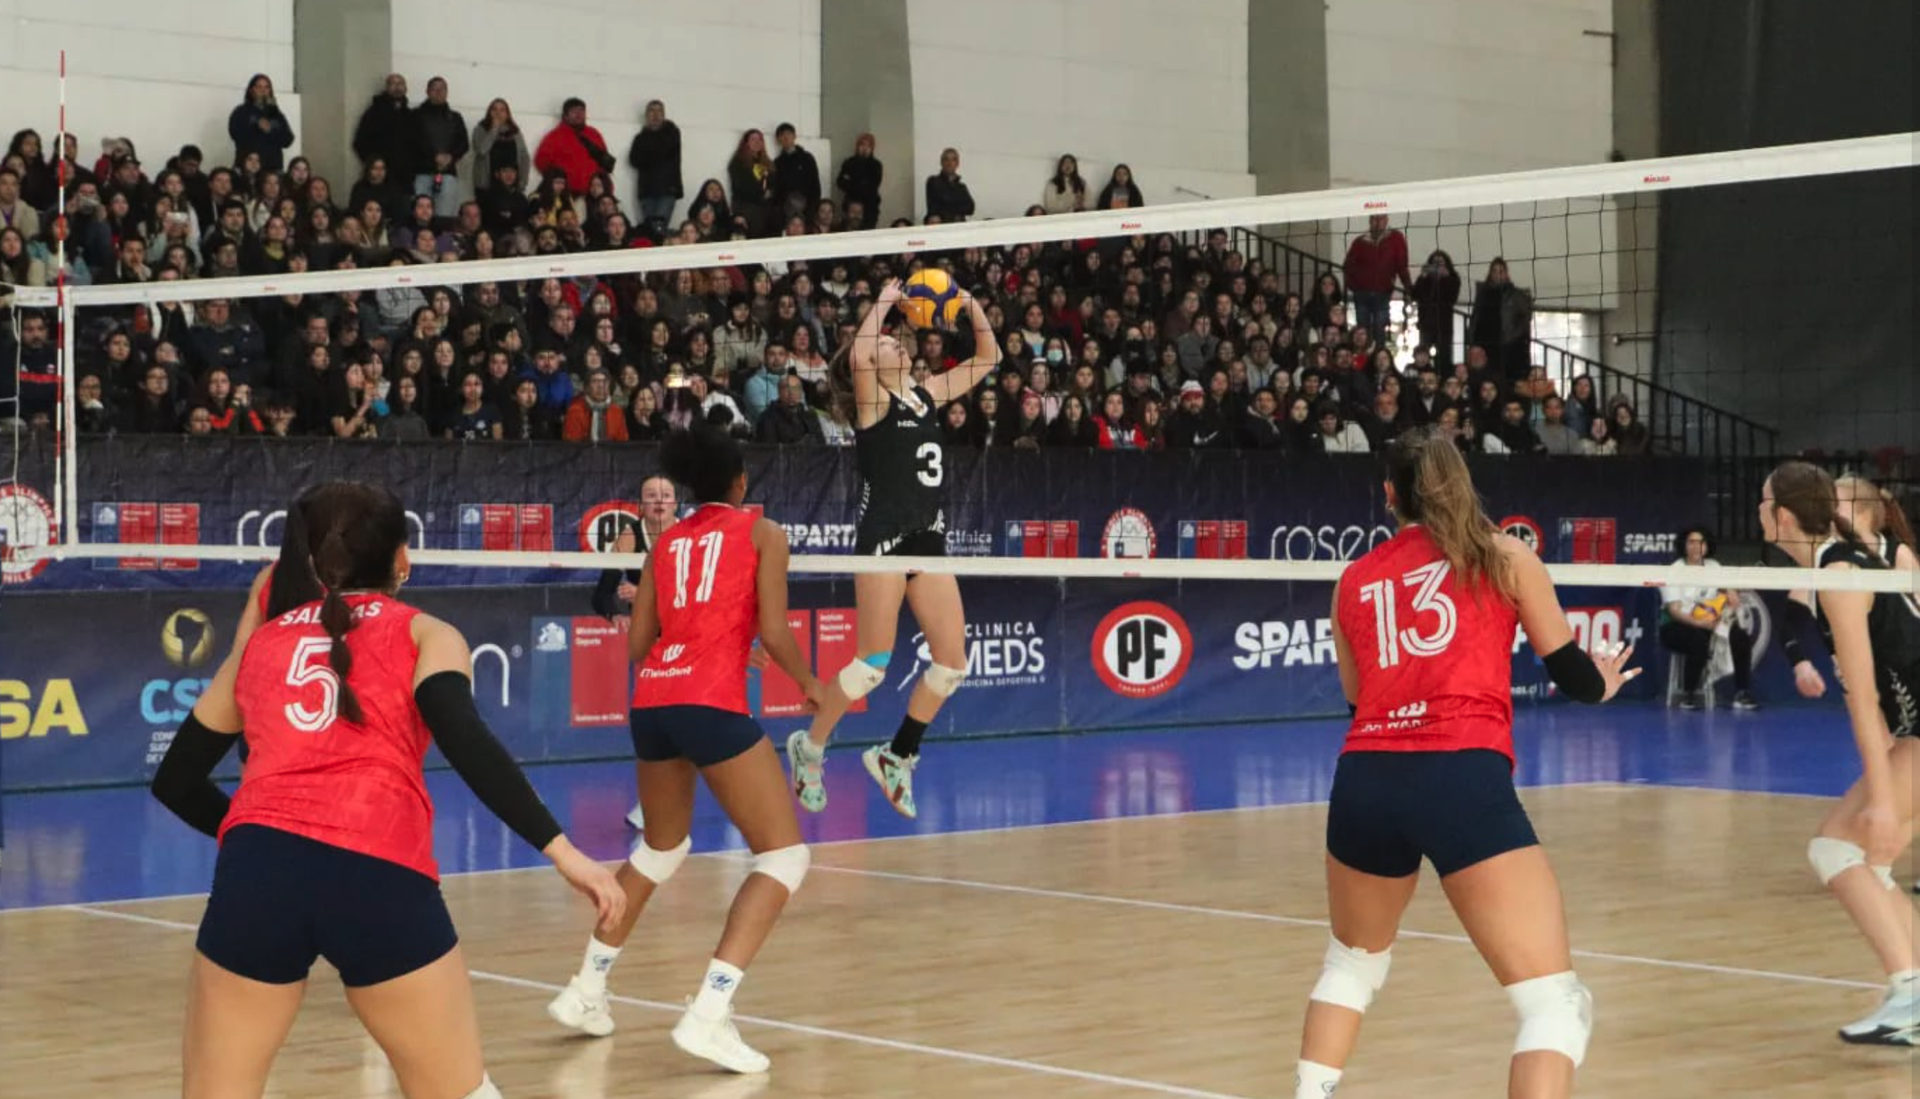 The volley life - Volley Ferns tour wrap